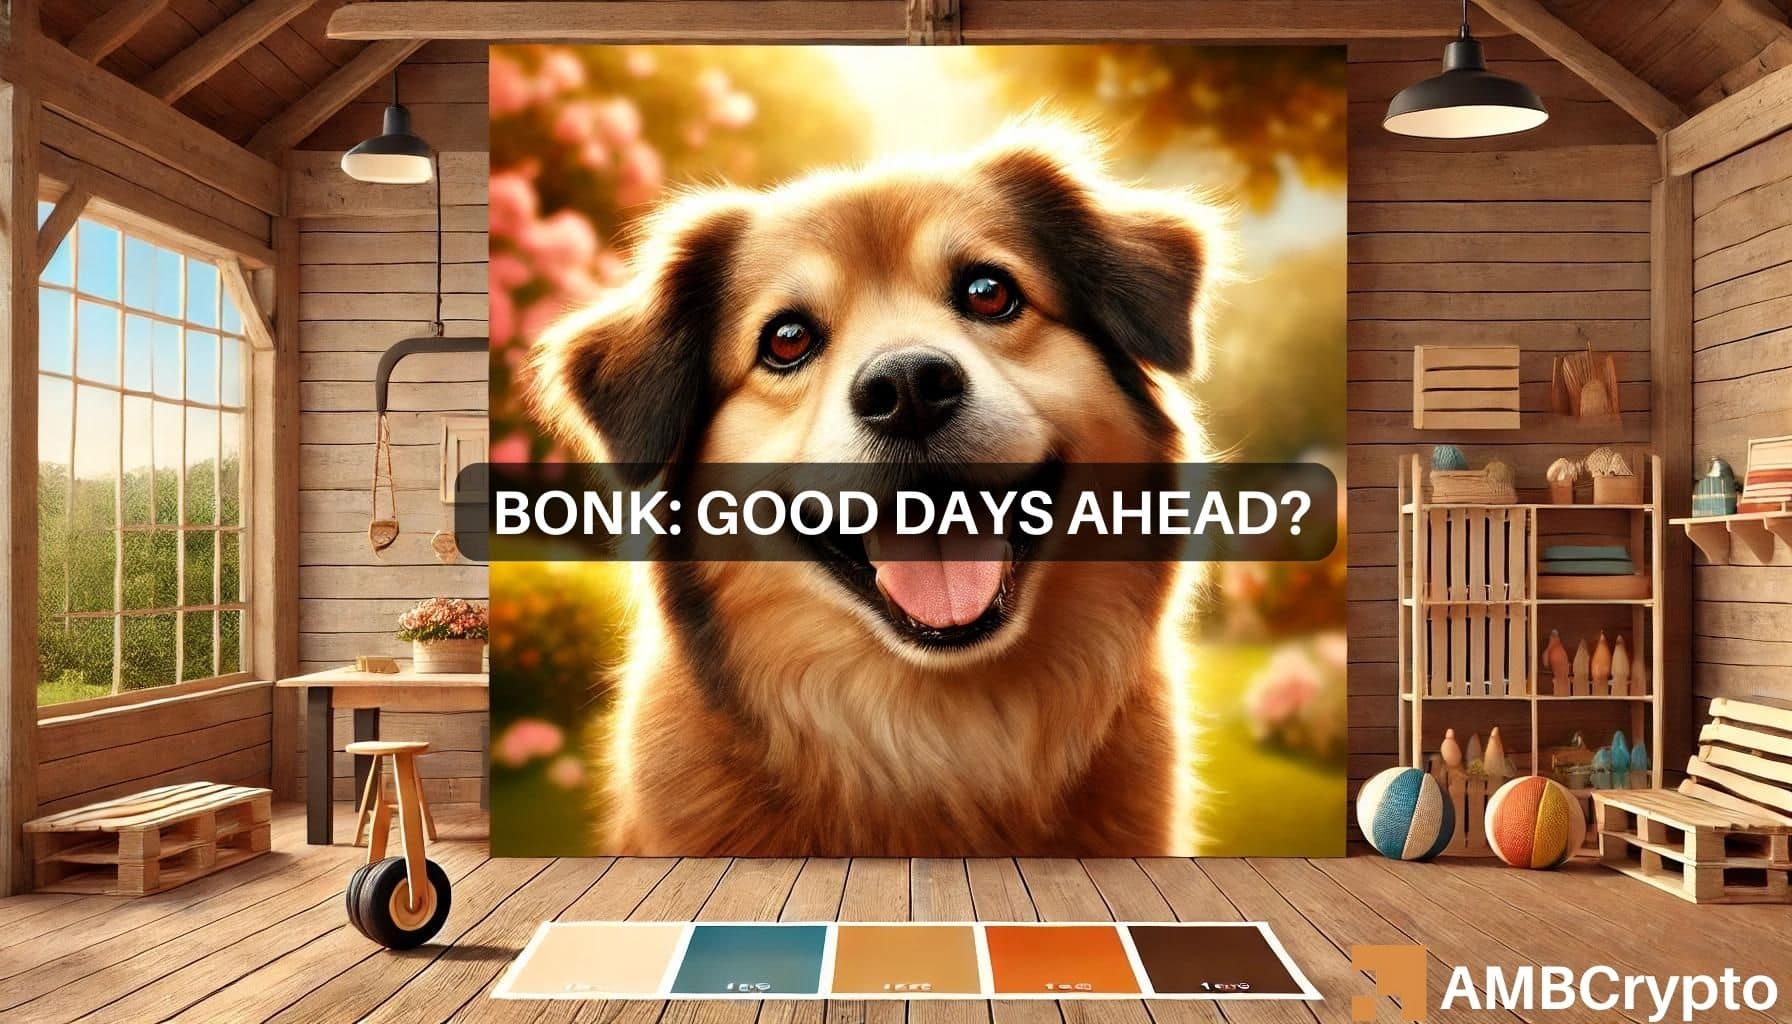 BONK has surged by 25.95% in the last seven days after staying dormant for the last six months.